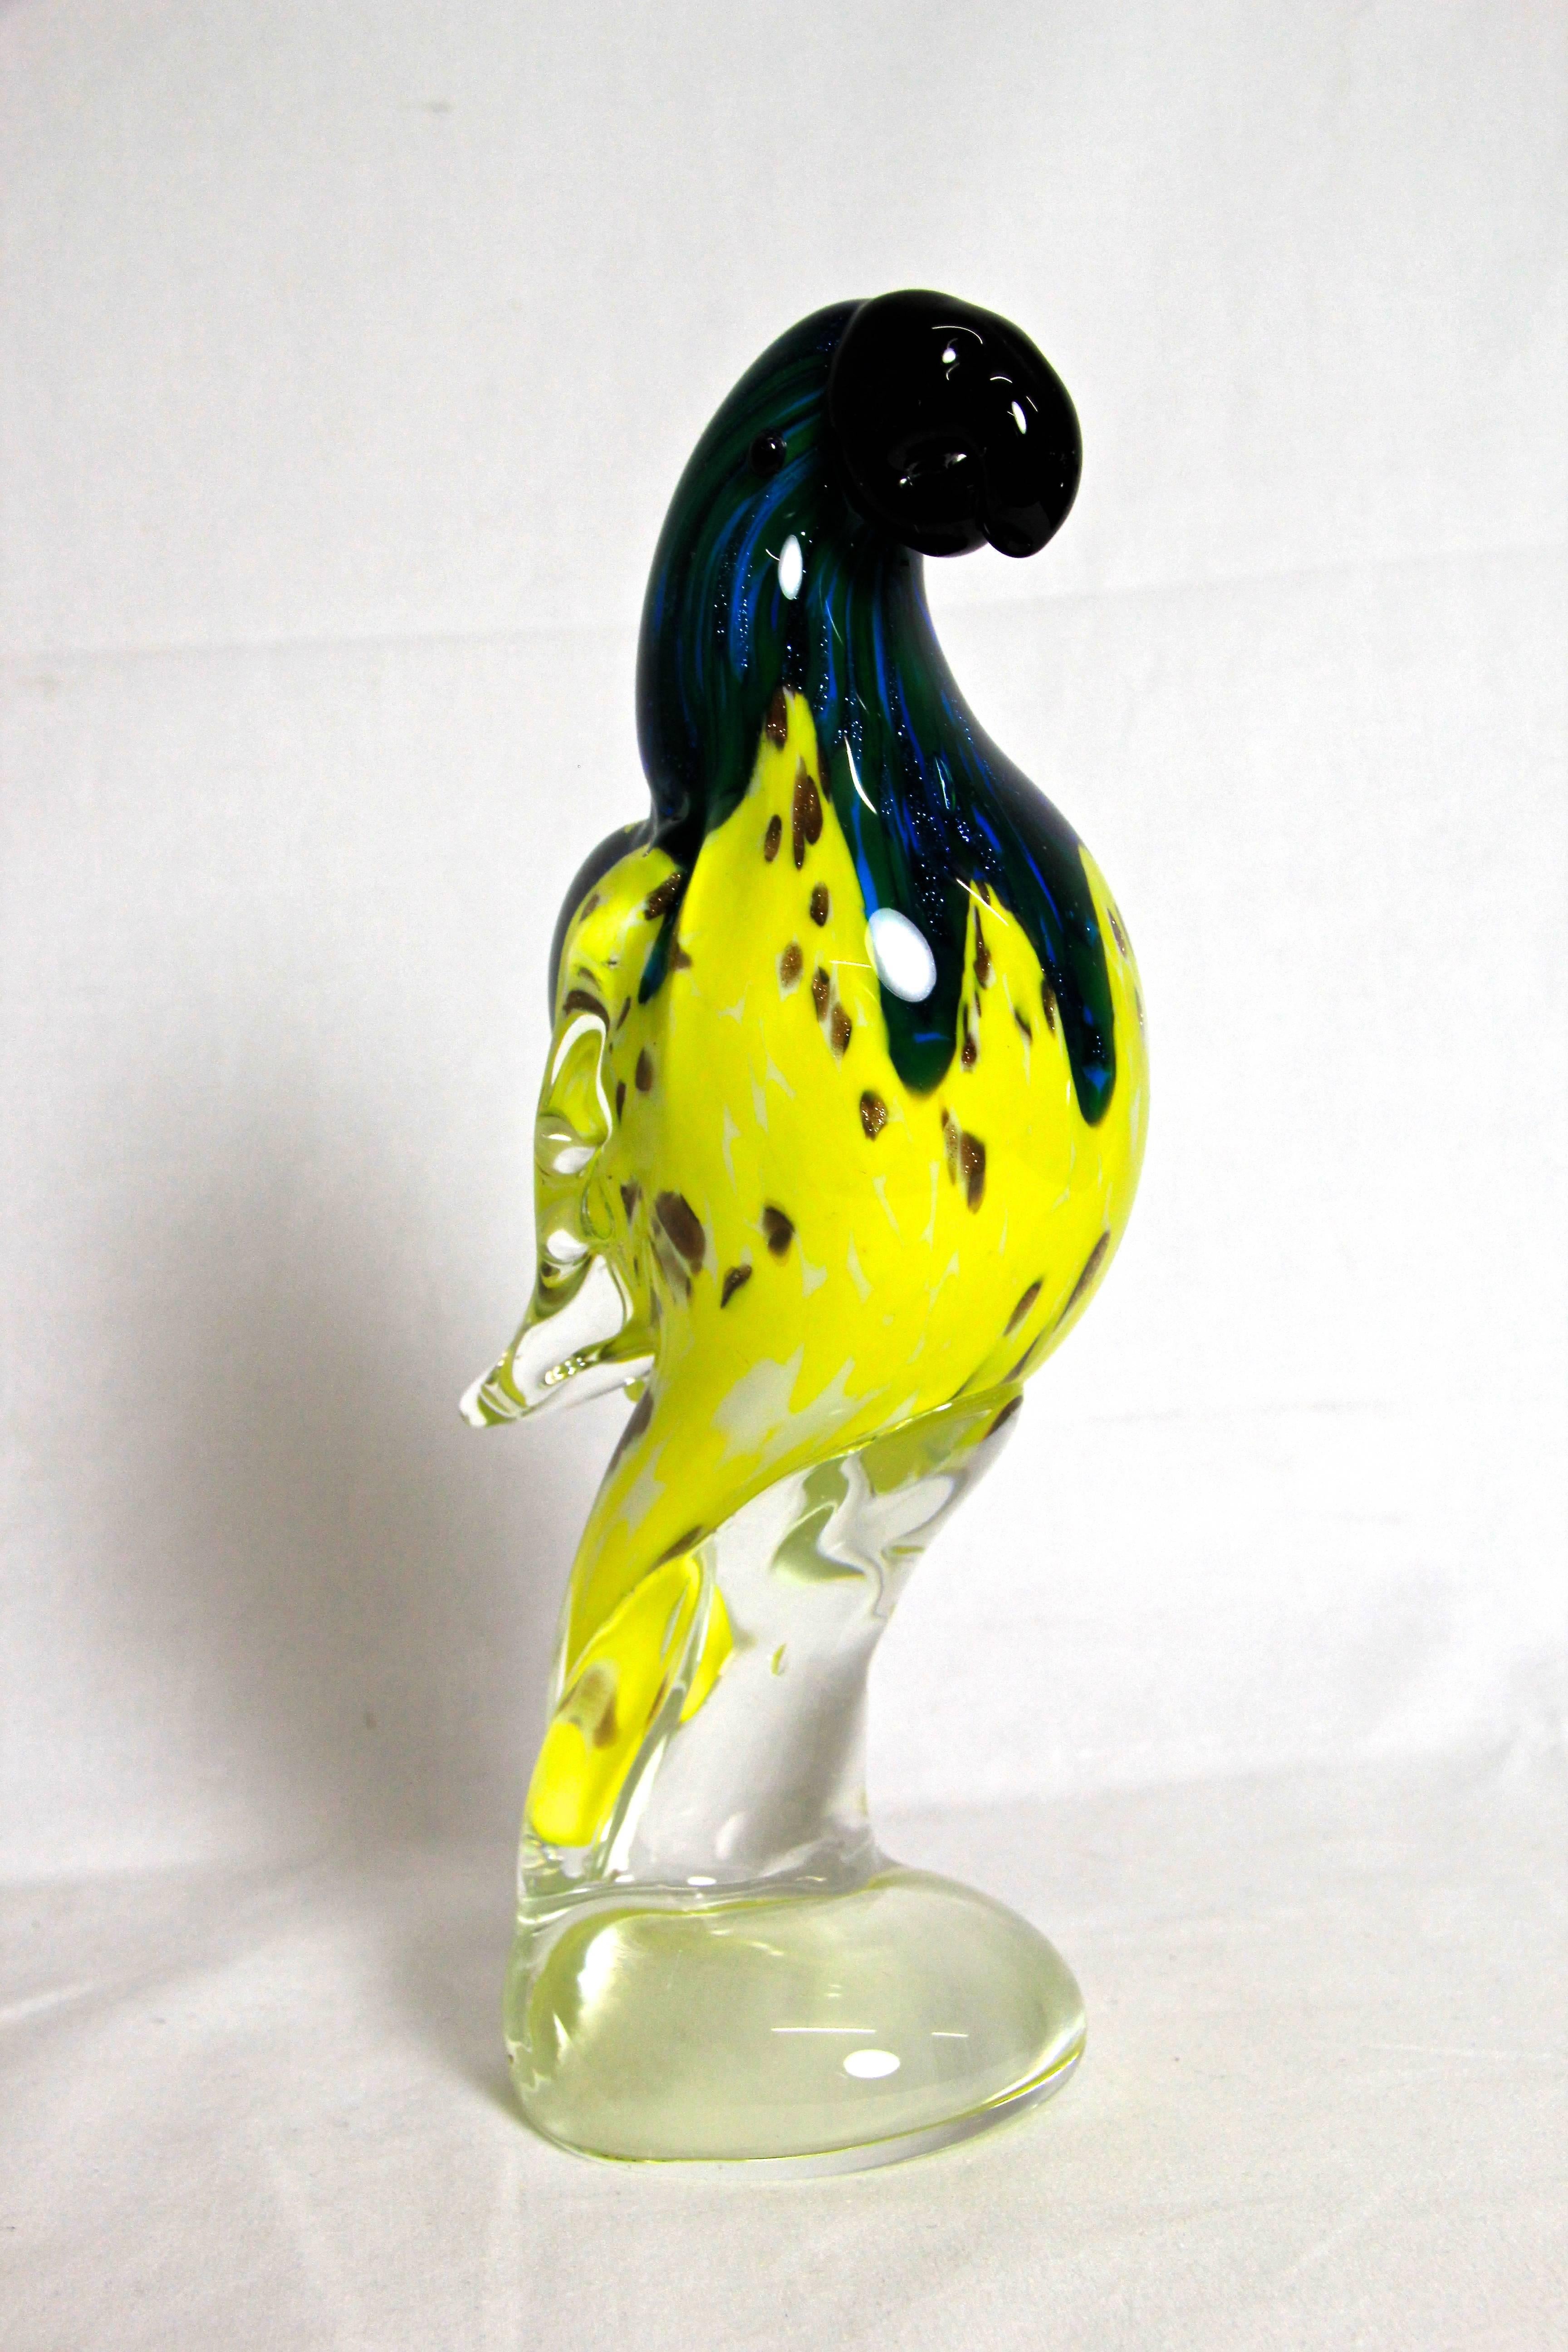 In this selection we are offering you eight properly selected Murano glass art pieces in absolute excellent quality. Every connoisseur/collector will know what we are talking about! 
This beautiful Murano glass art Parrot is the 6th piece of our